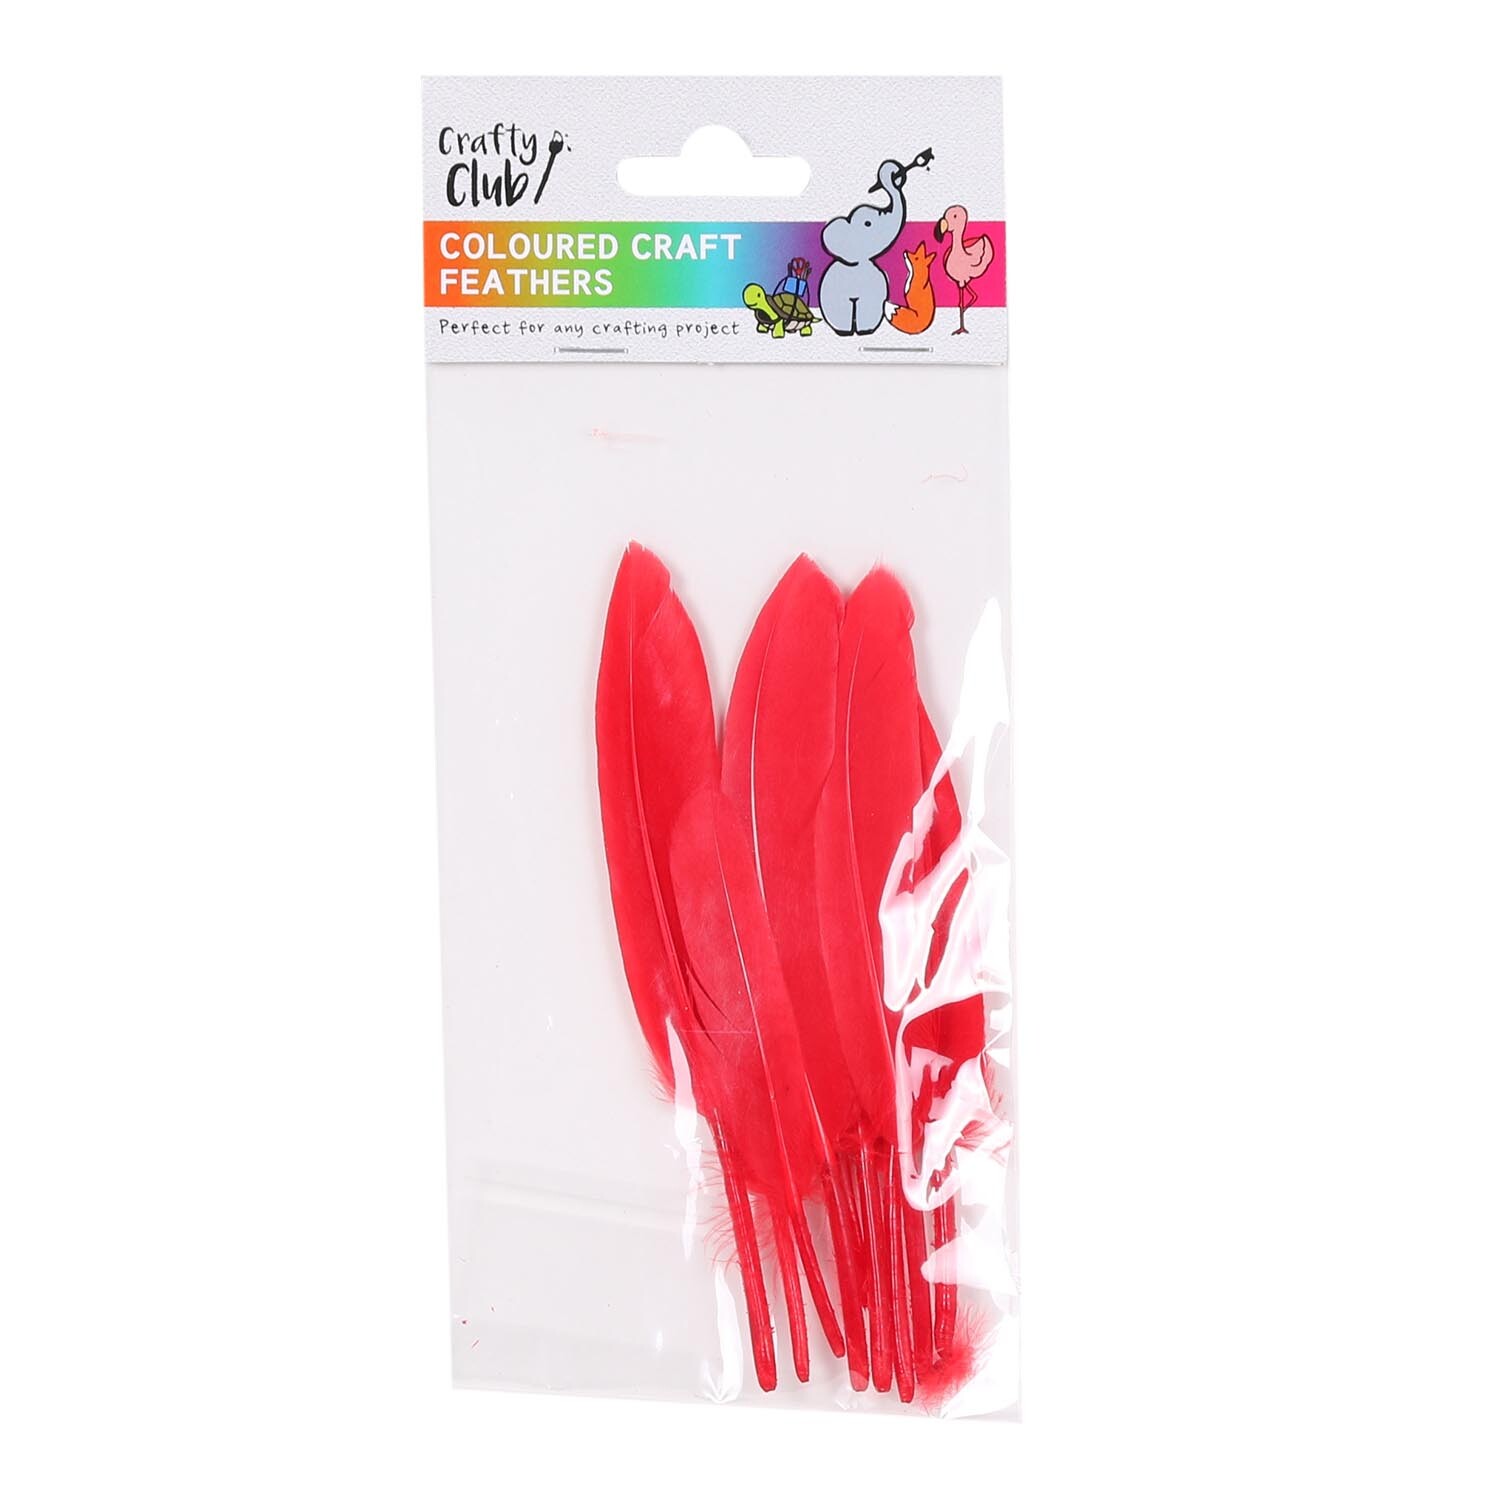 Crafty Club Coloured Craft Feathers Image 1